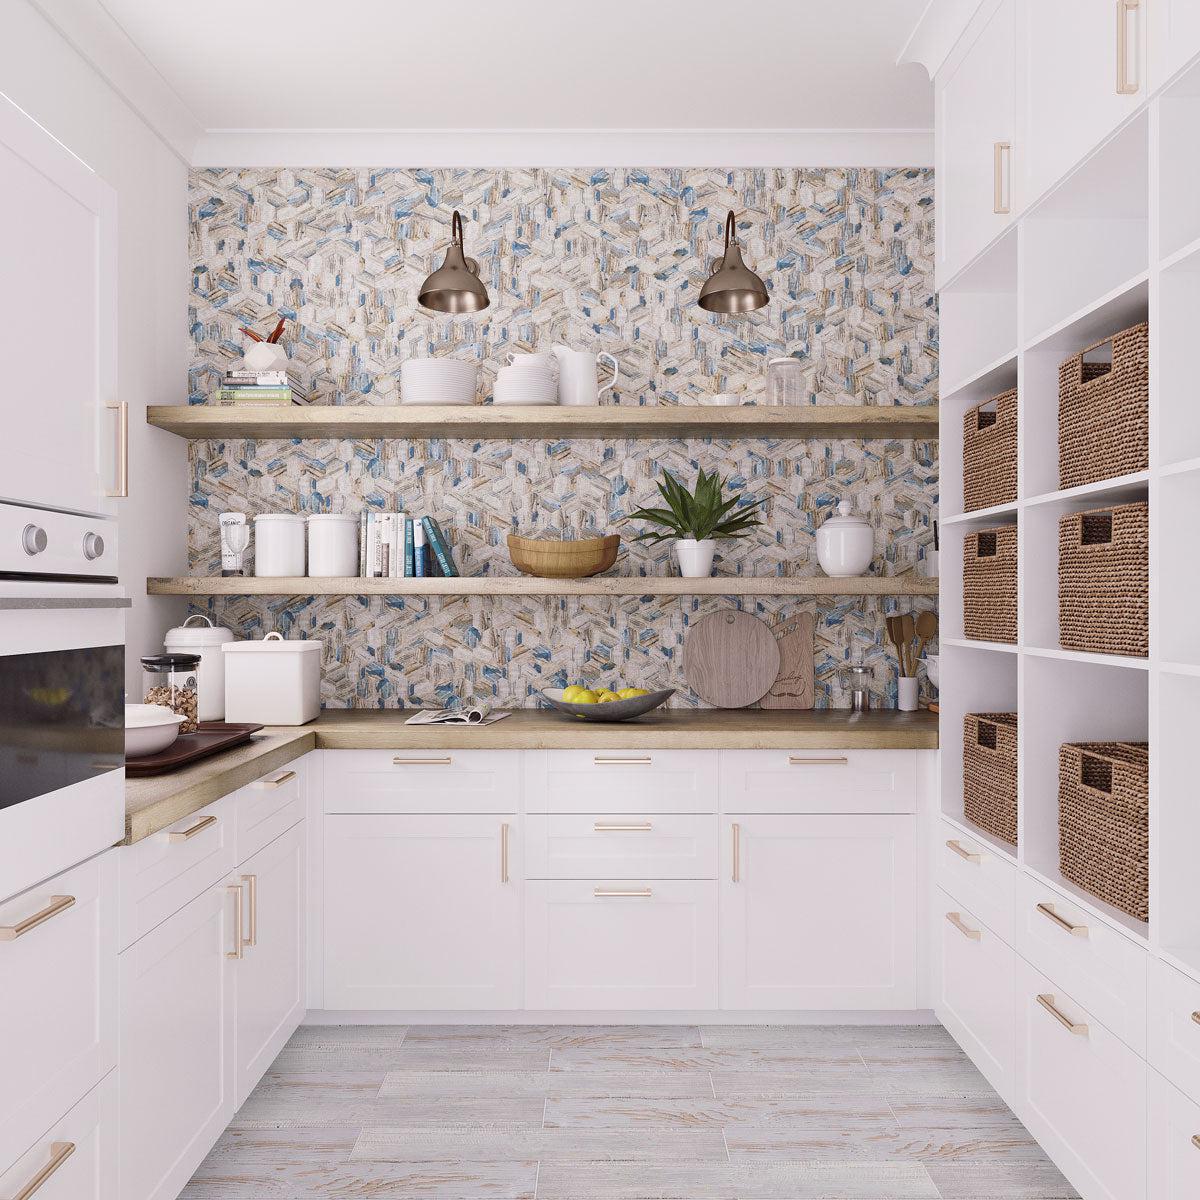 Modern farmhouse kitchen pantry with wood look hexagon tiles in recycled glass